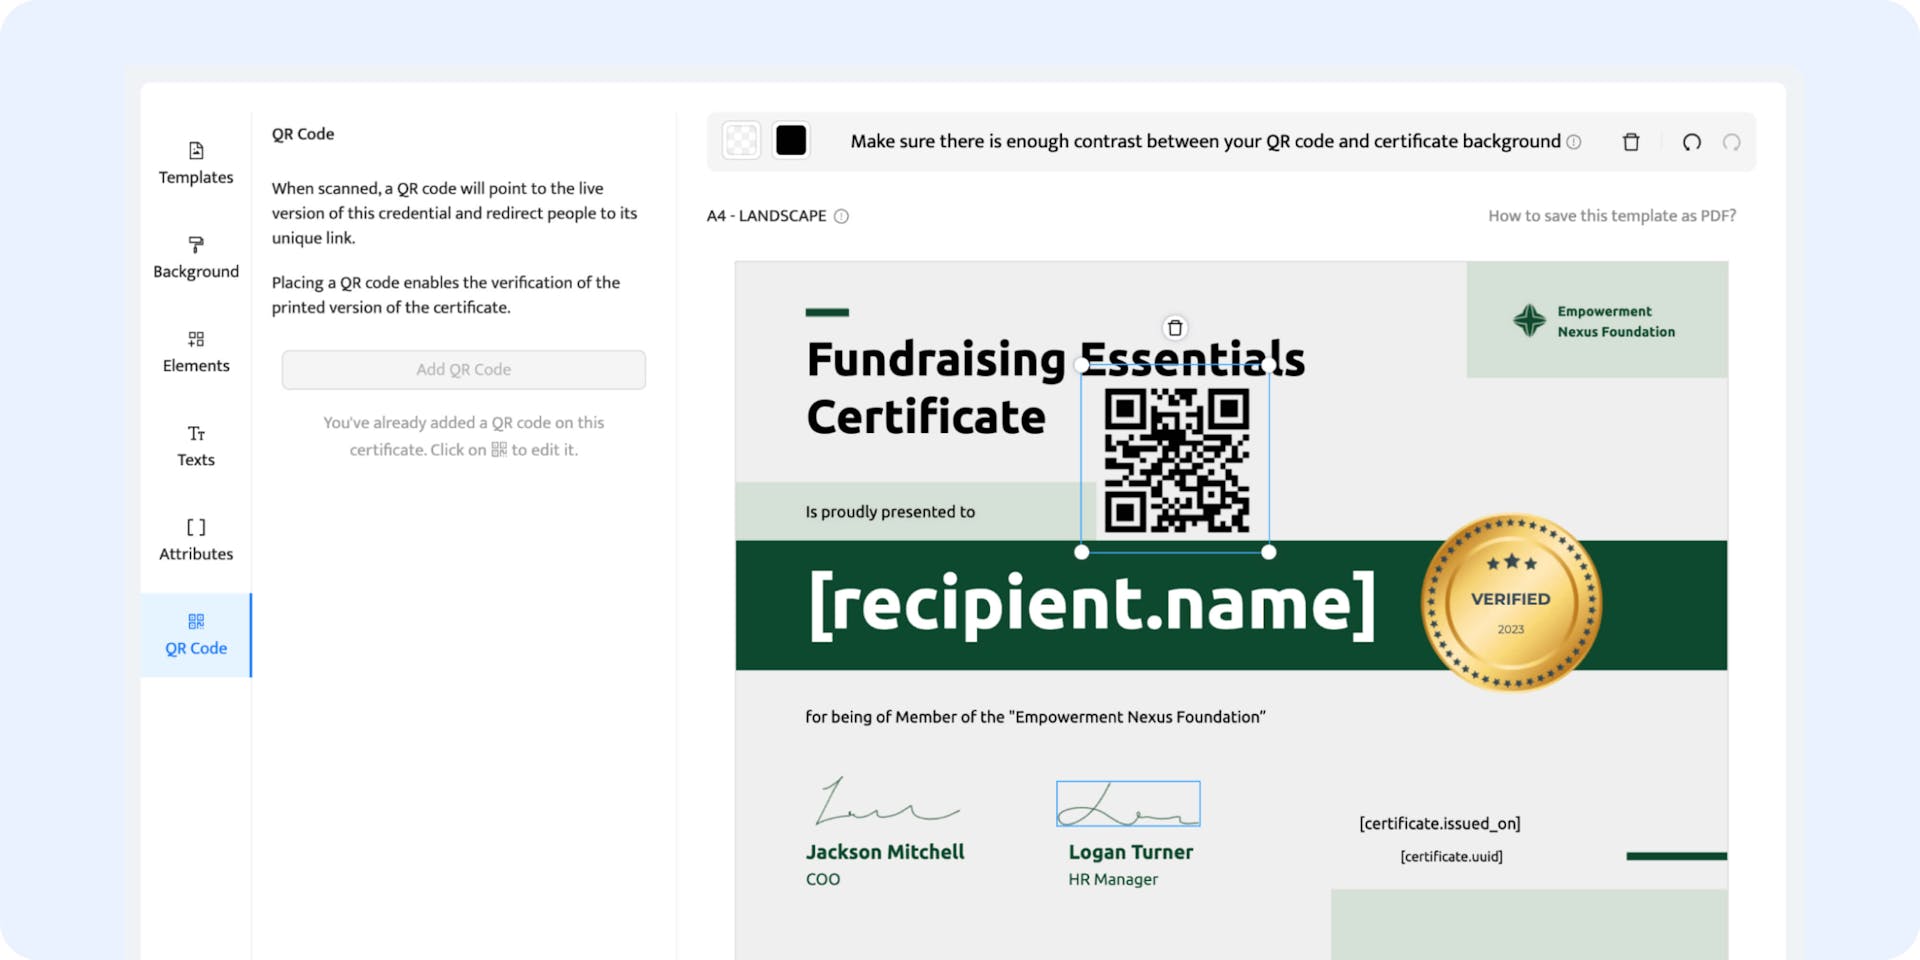 Adding a QR code to the certificate as an update.